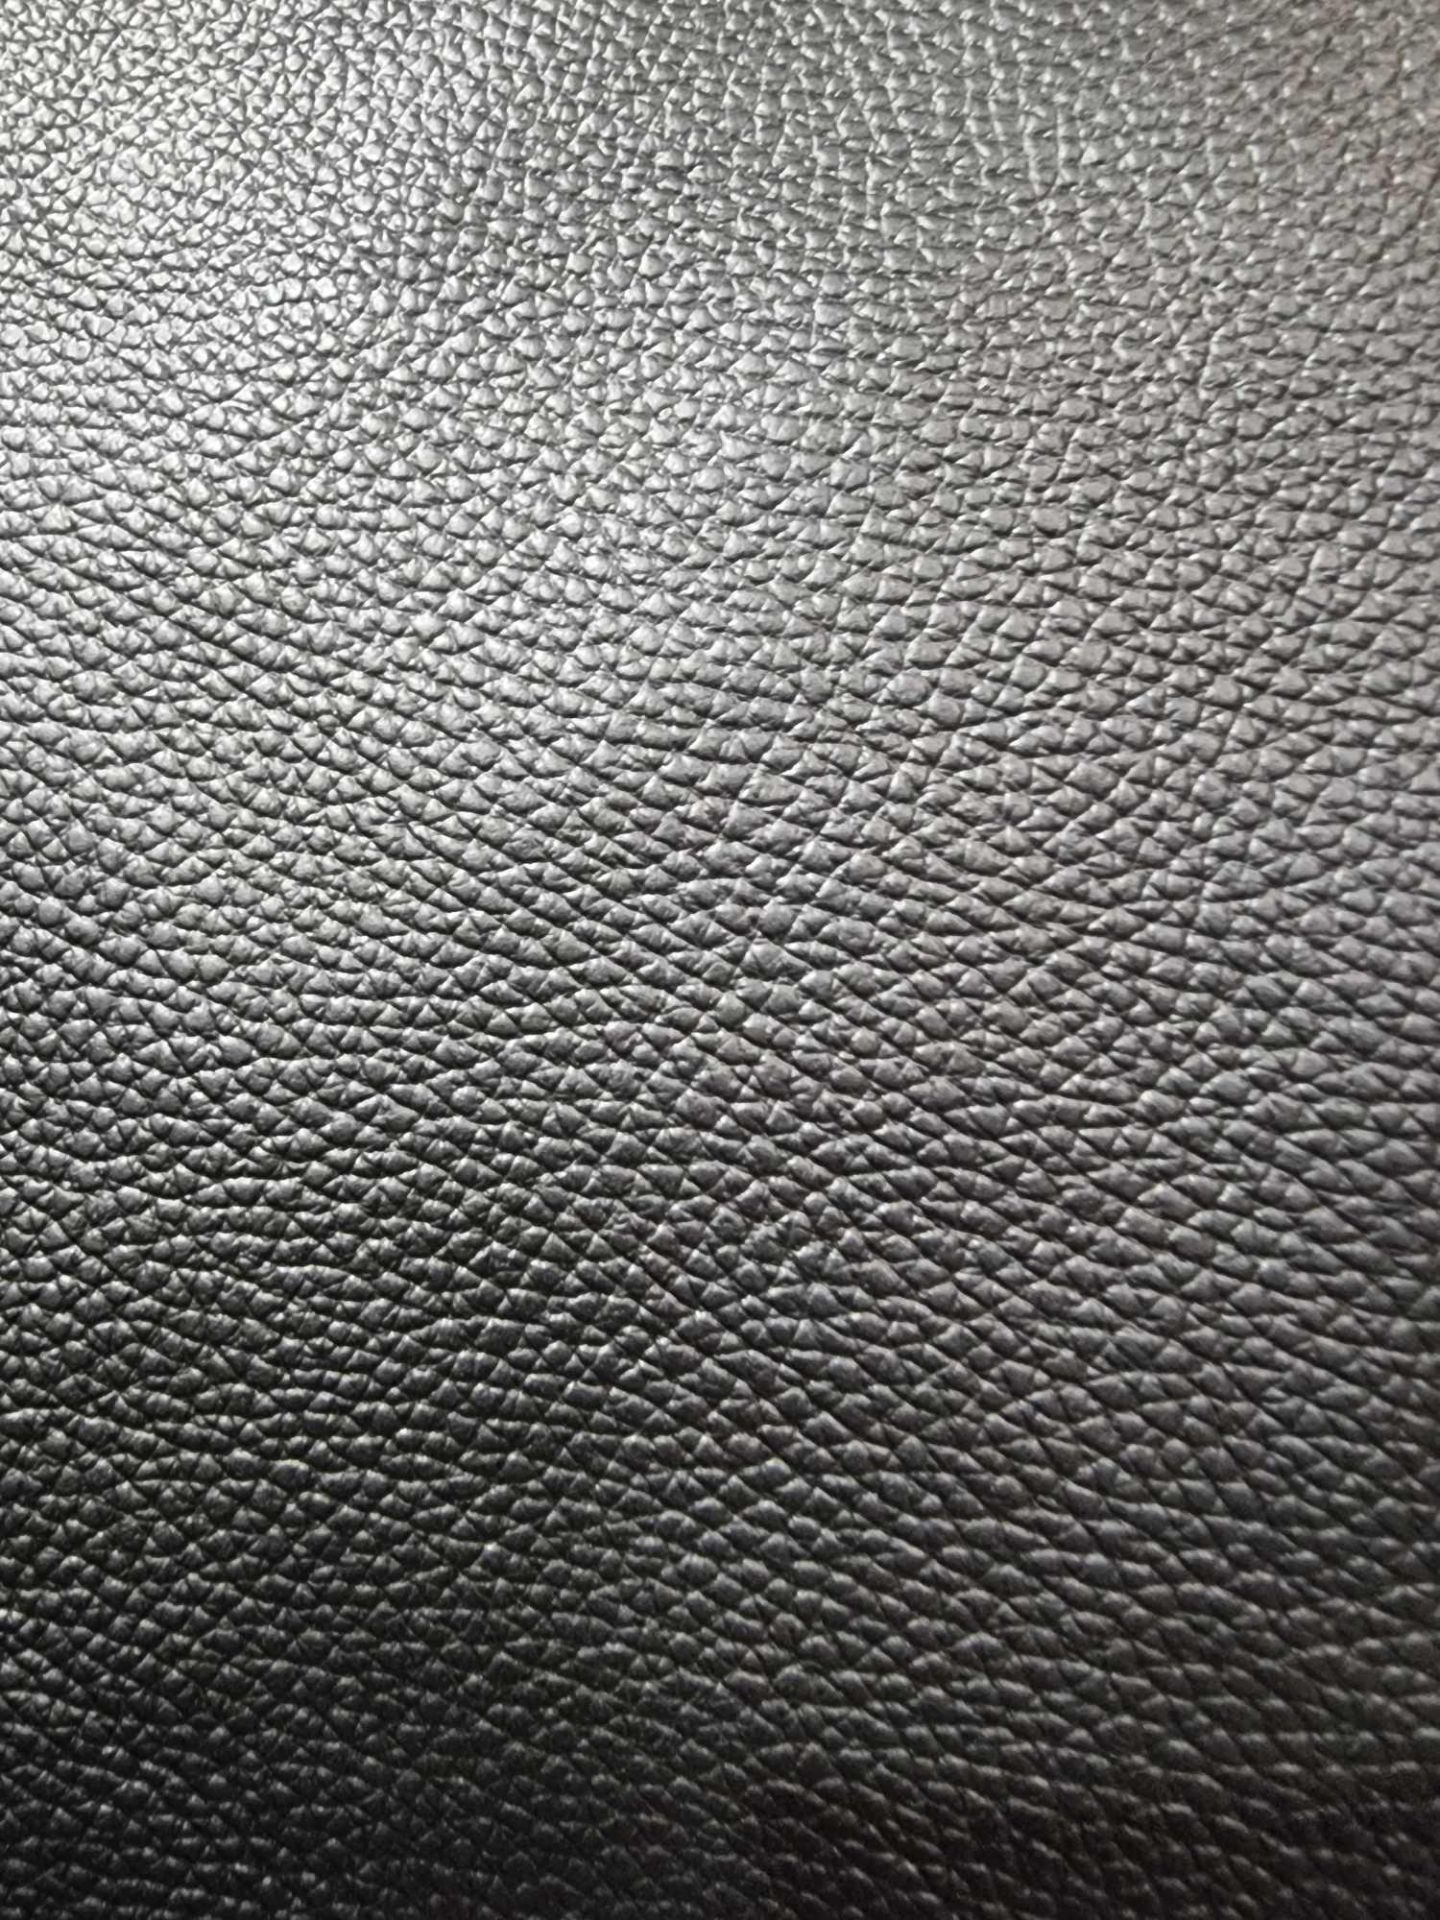 Duresta Midnight Silver Leather Hide approximately 2.4mÂ² 2 x 1.2cm ( Hide No,254) - Image 2 of 2